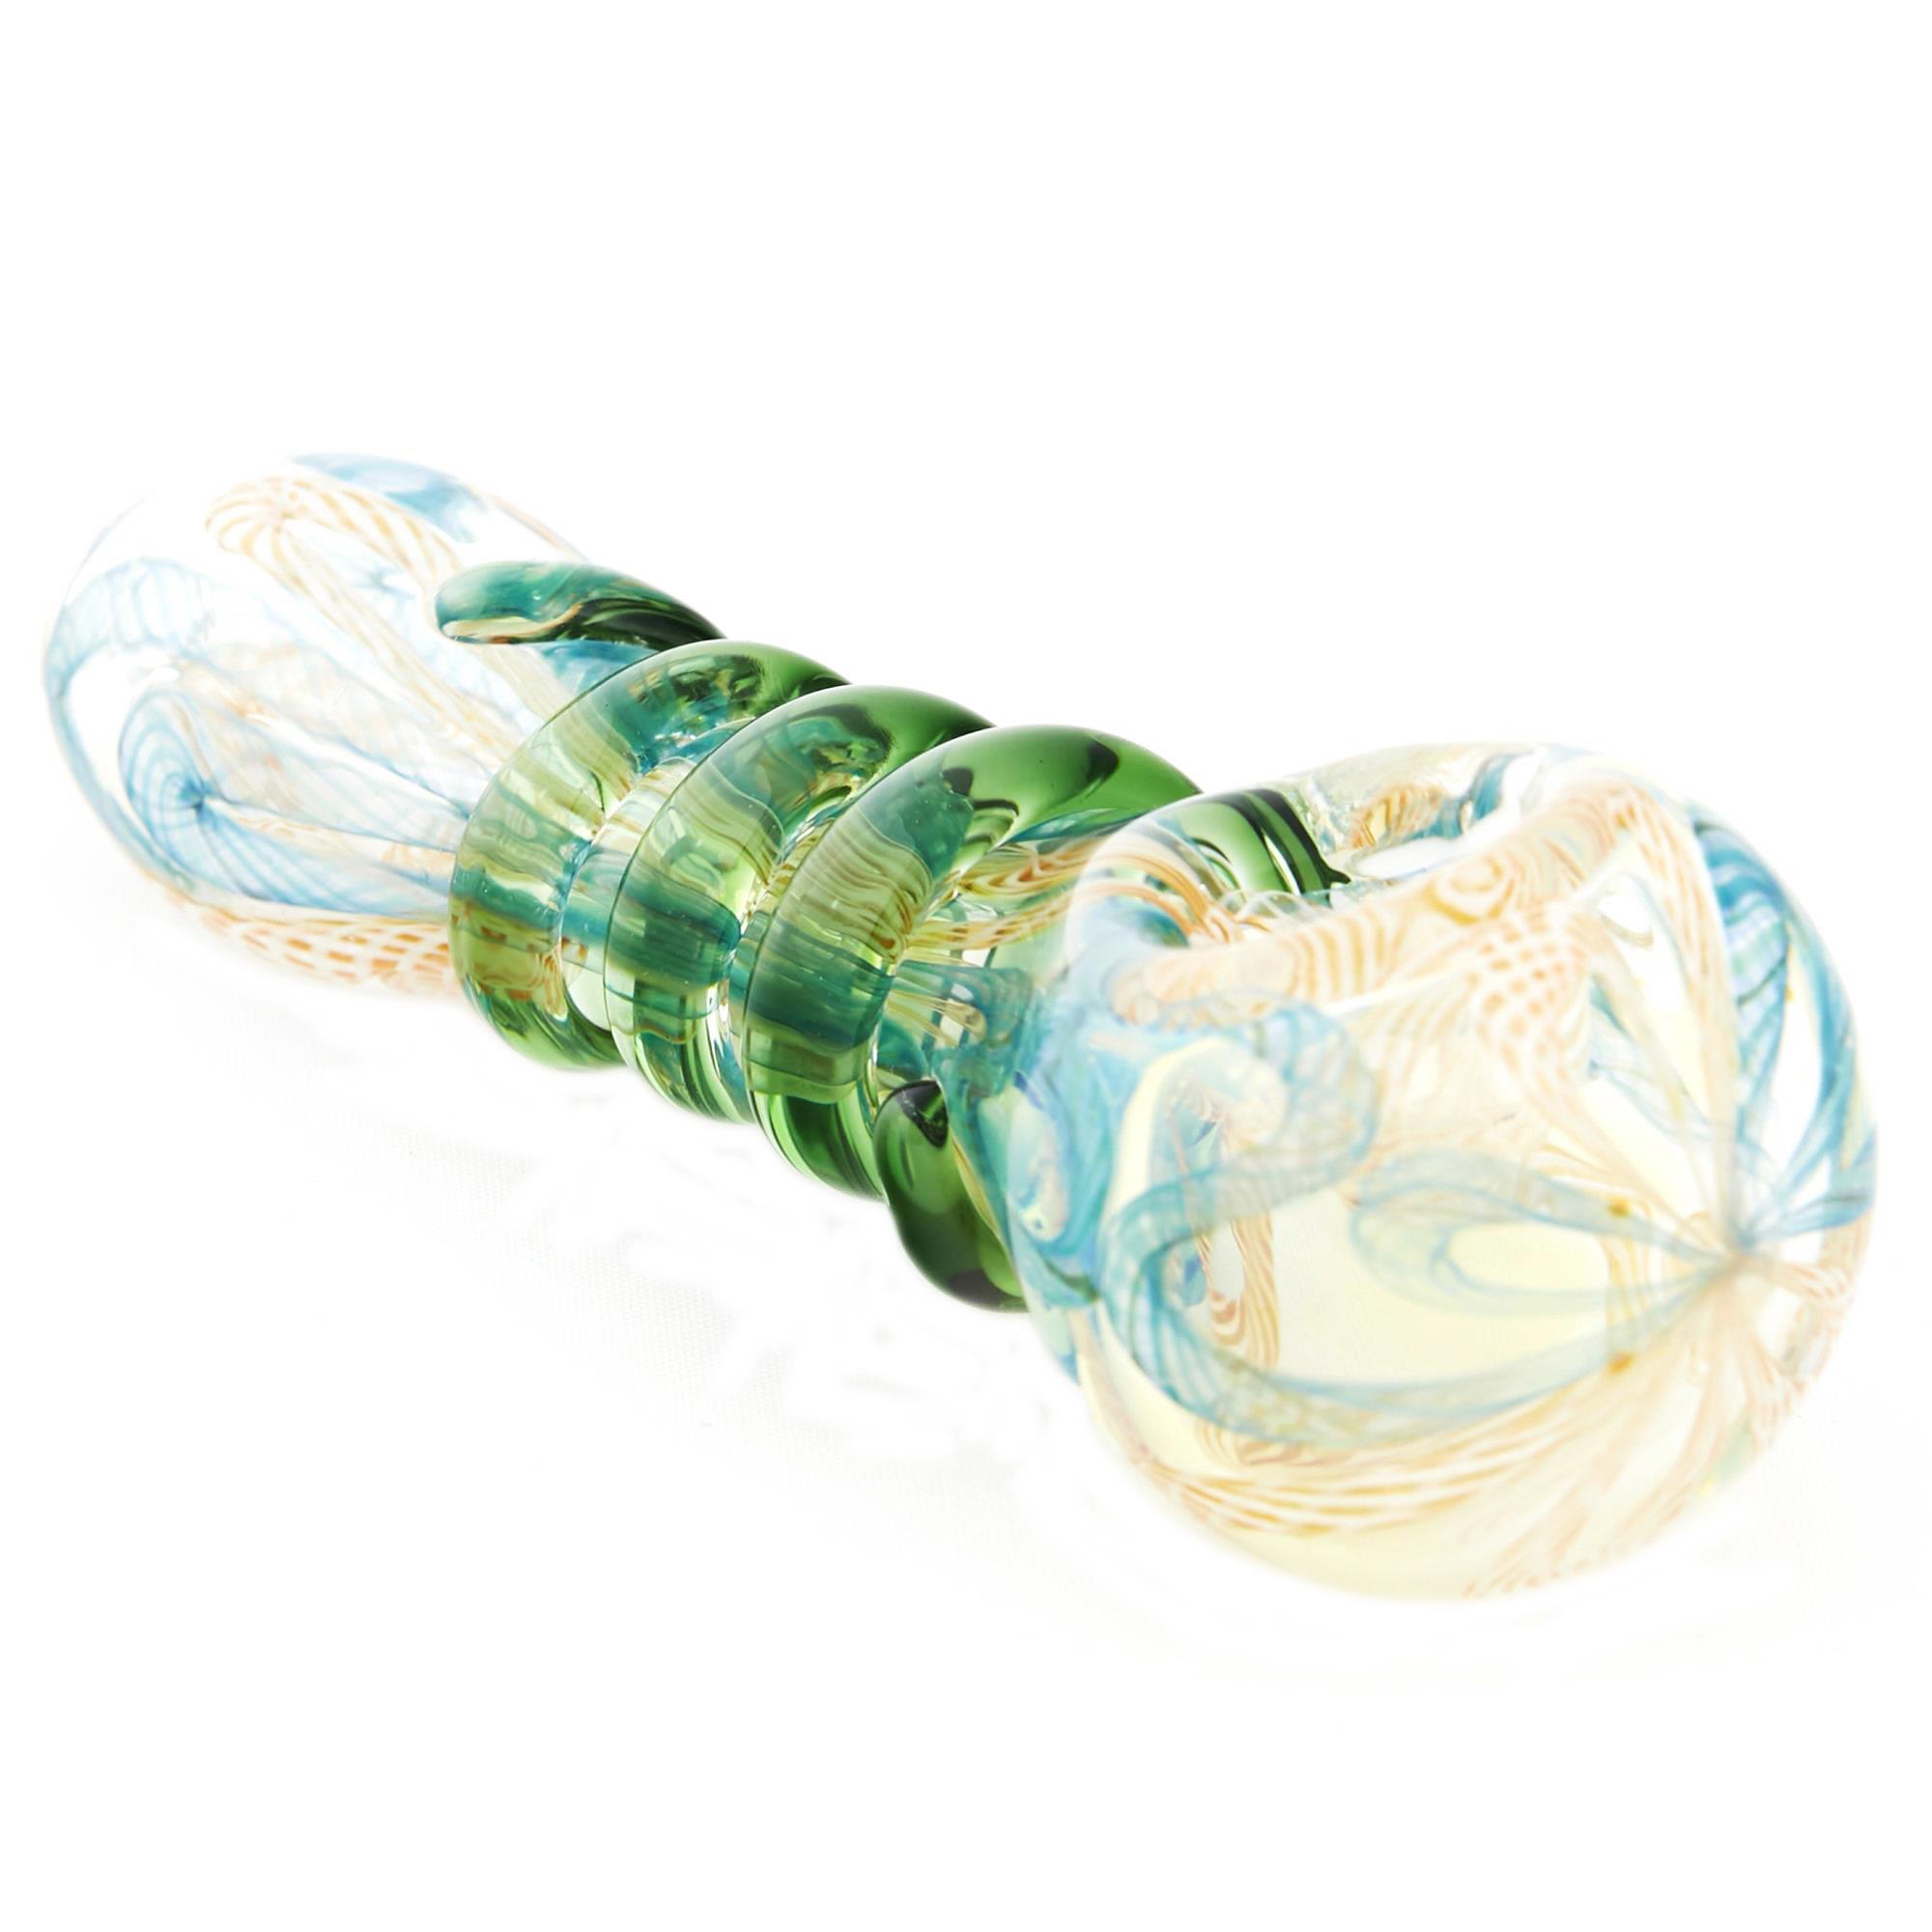 STONED SPOON PIPE